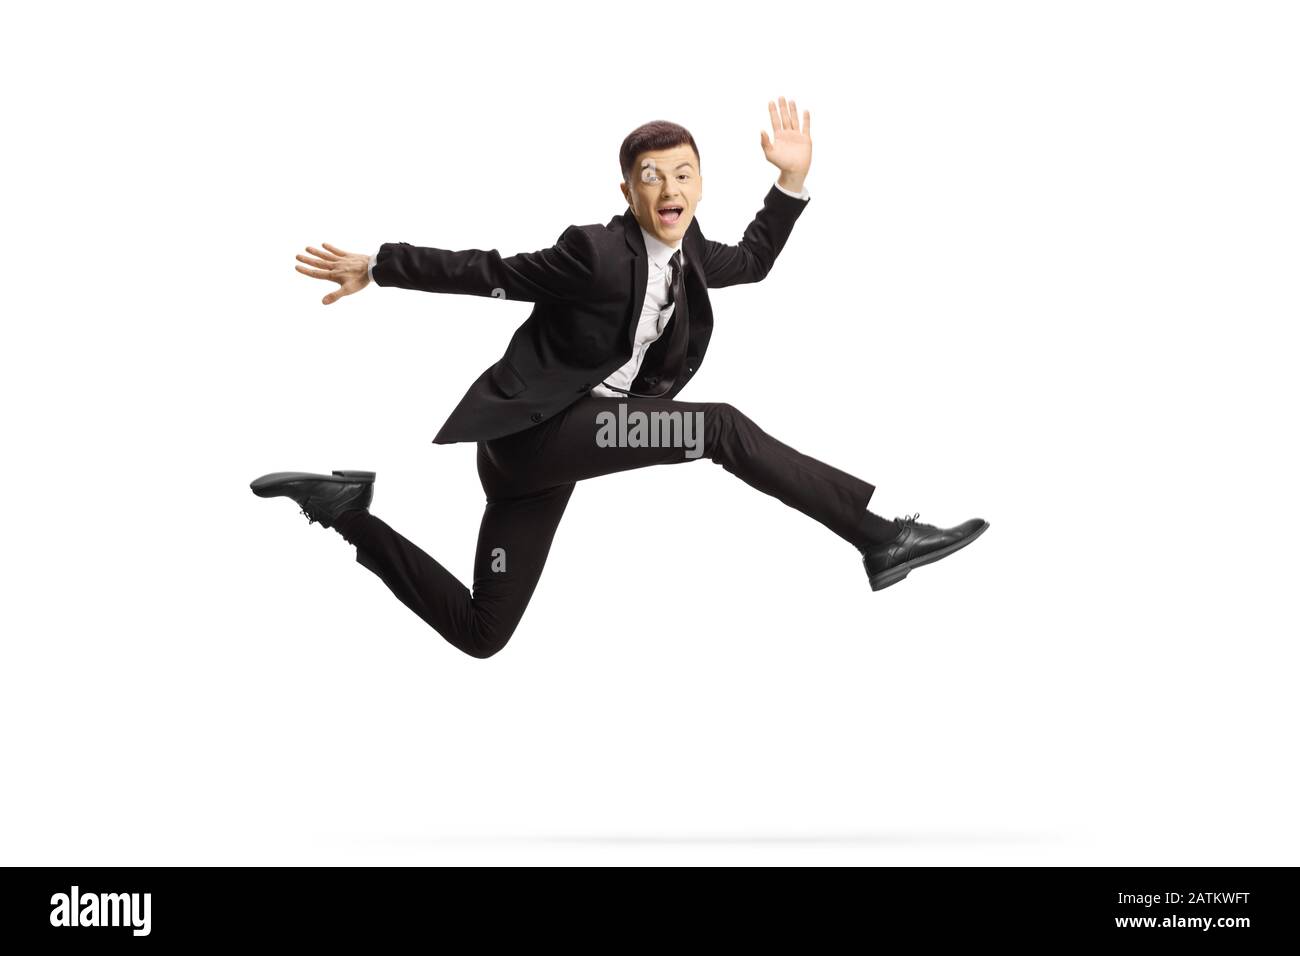 Cheerful young man in a black suit jumping and looking at camera ...